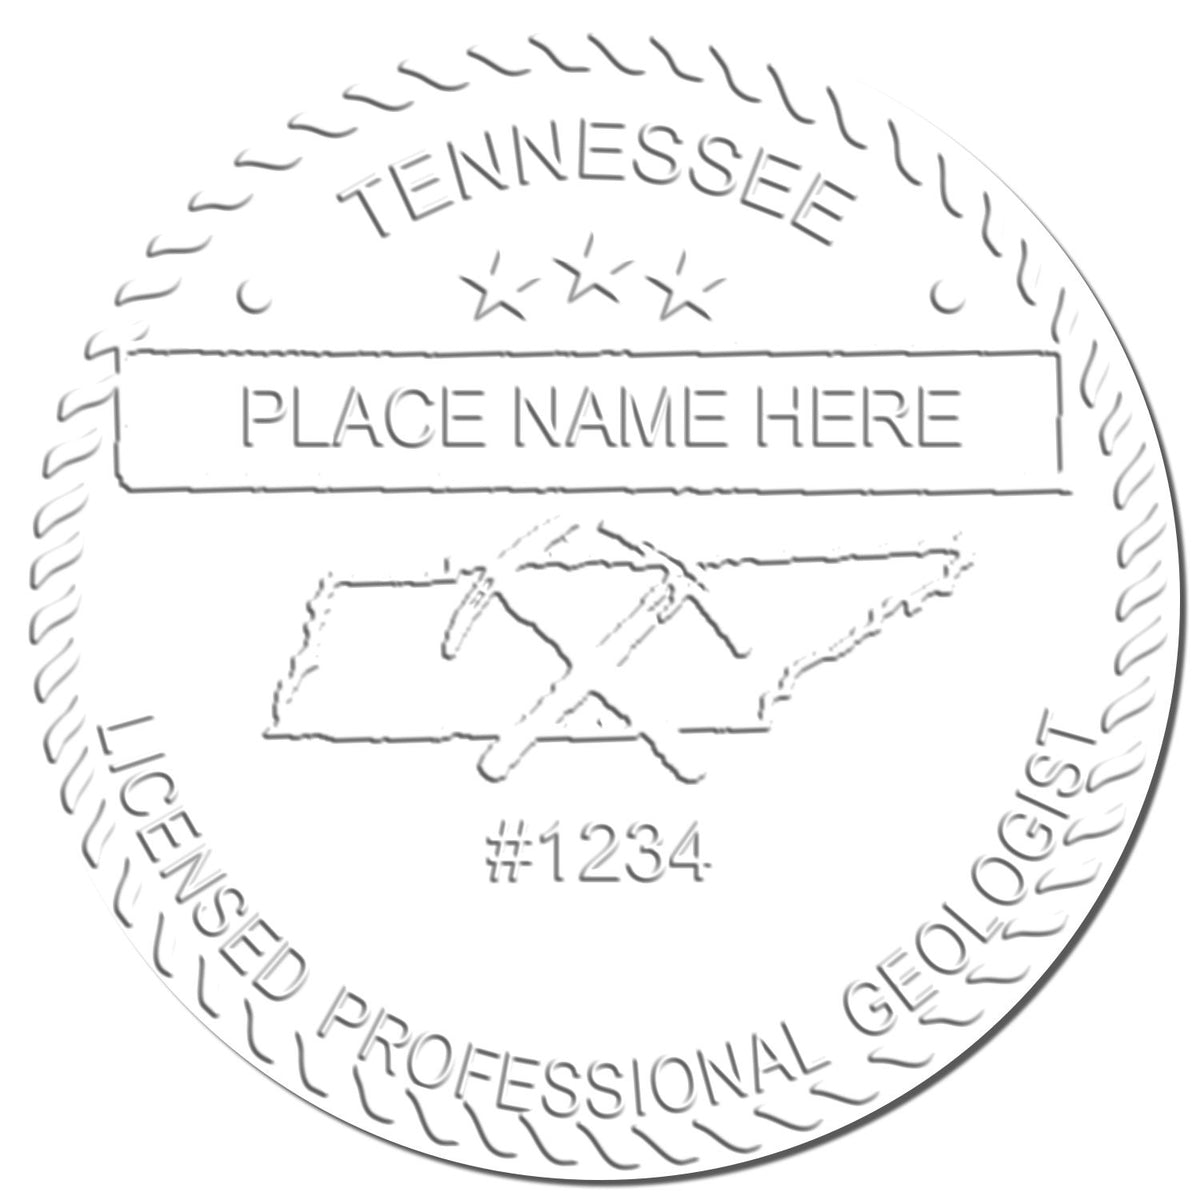 A photograph of the State of Tennessee Extended Long Reach Geologist Seal stamp impression reveals a vivid, professional image of the on paper.